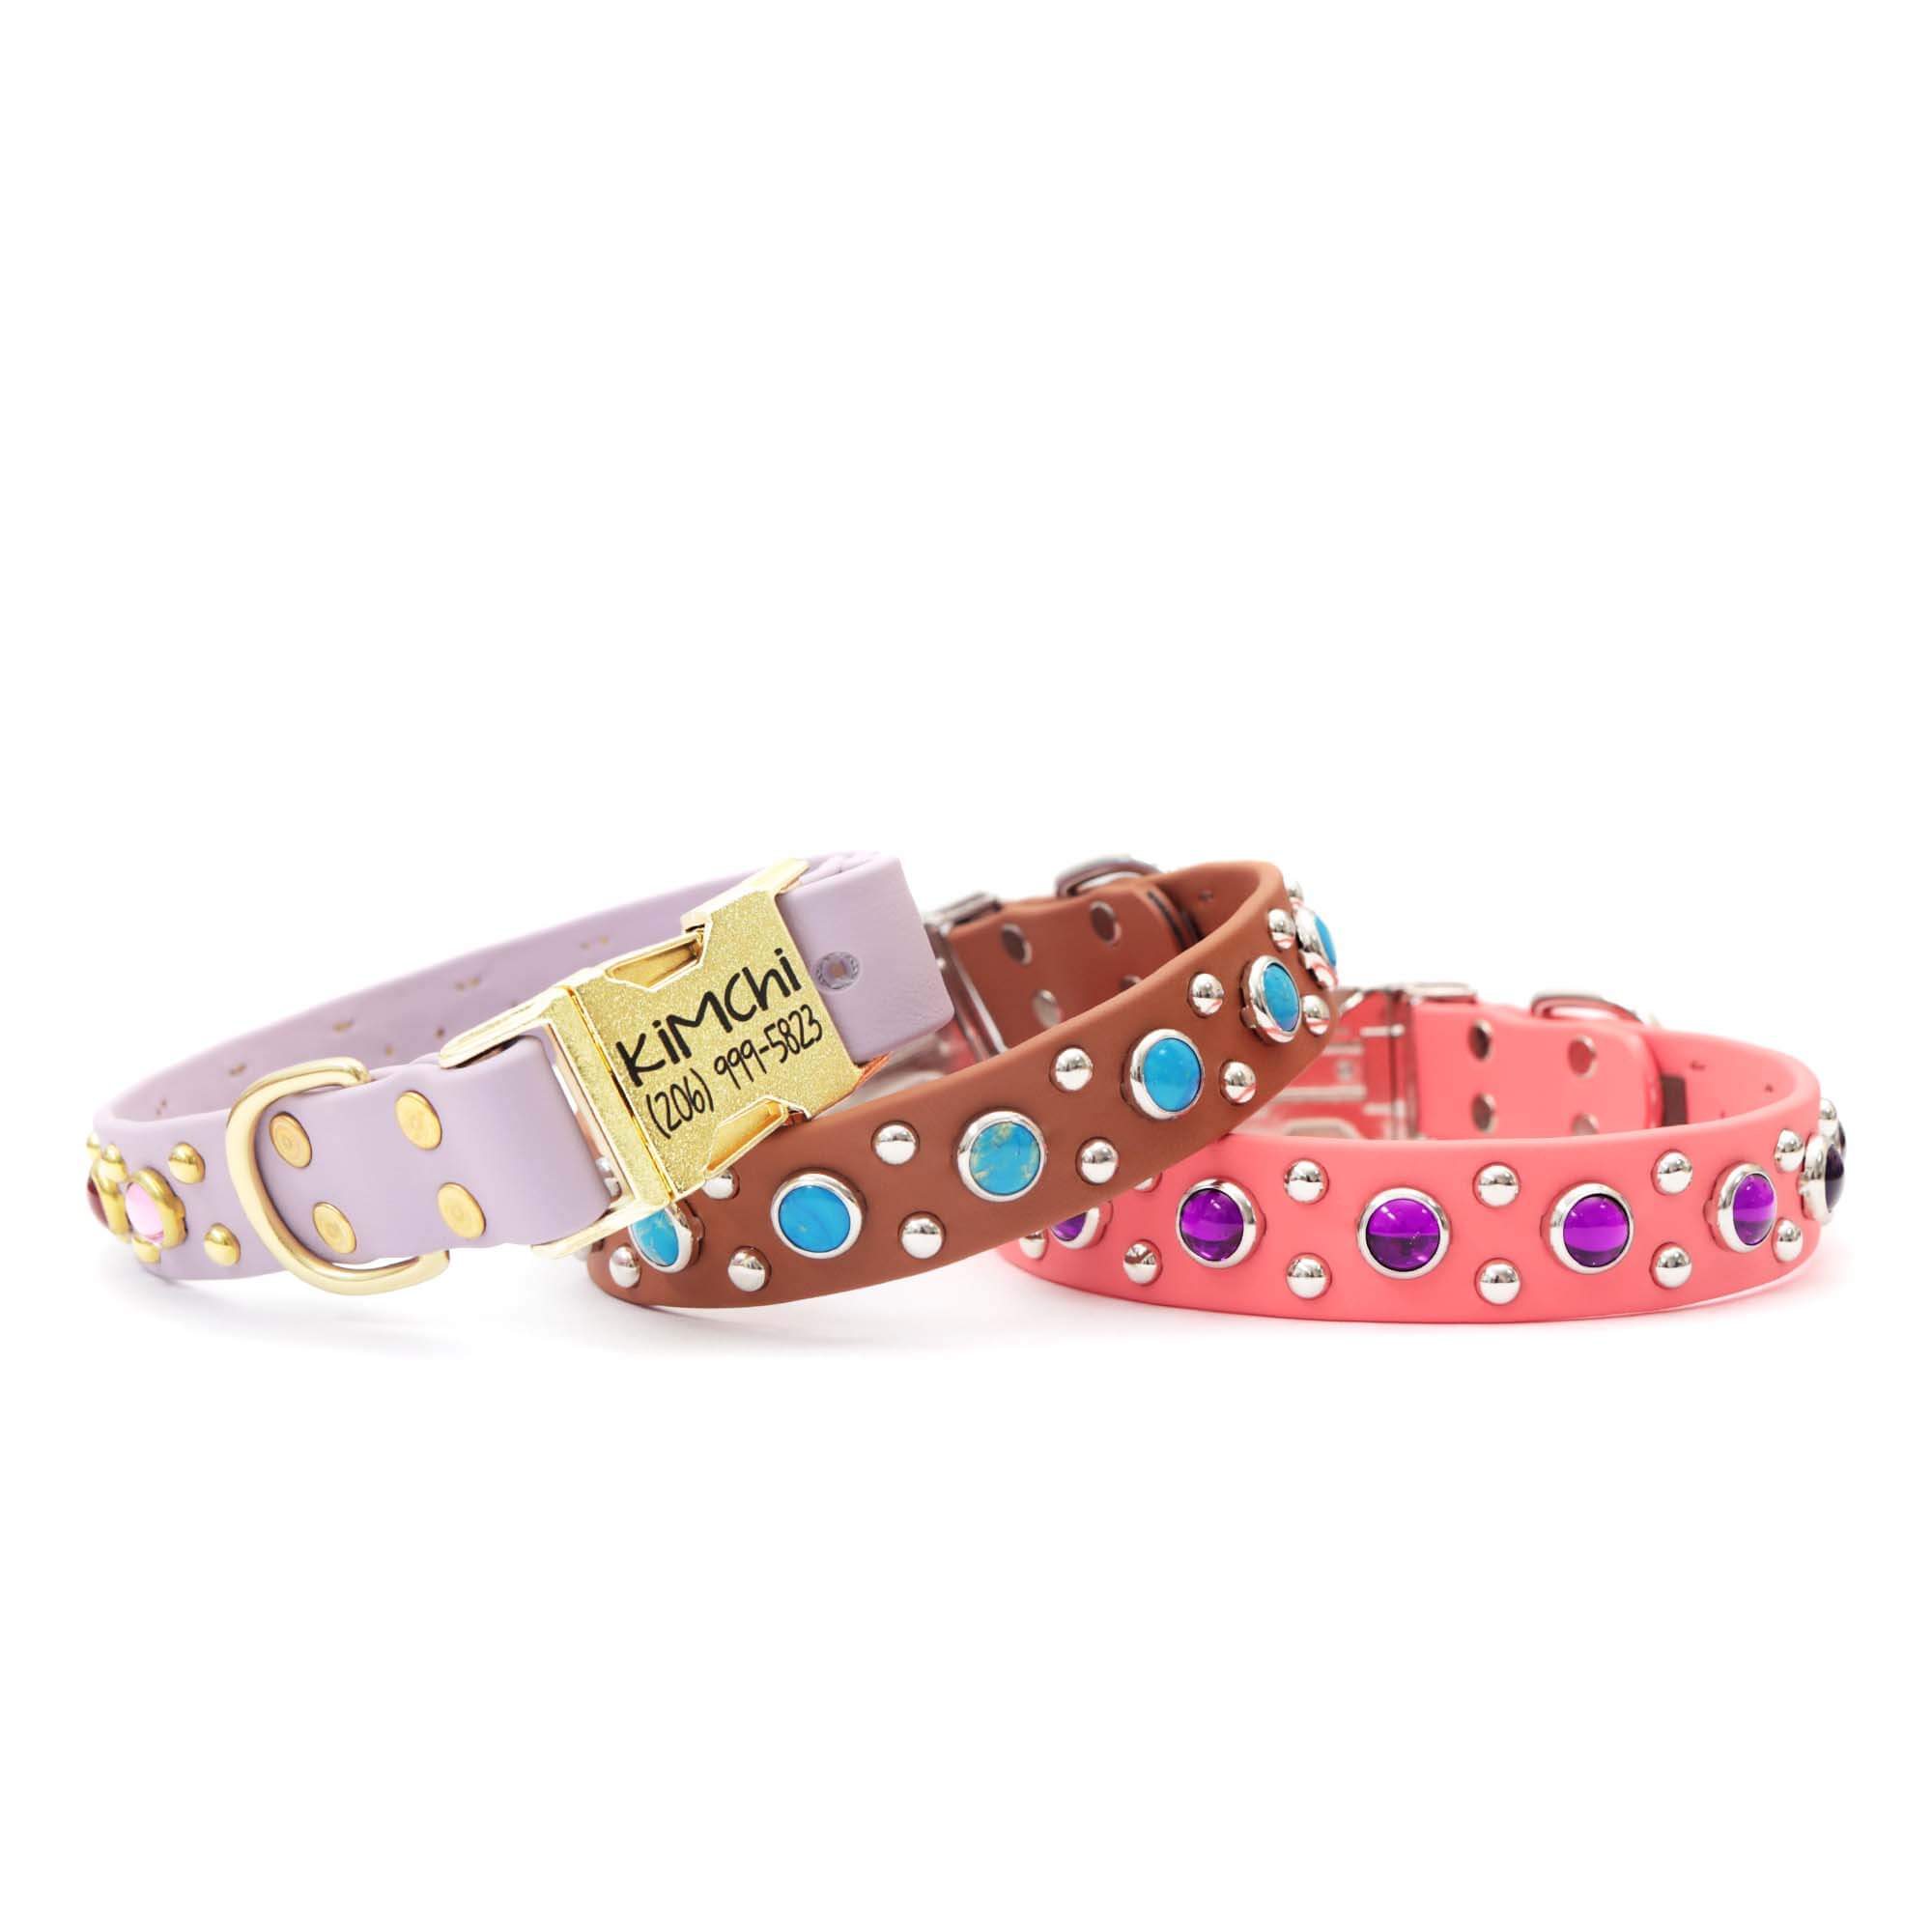 Personalized Studs & Gems Leather Dog Collar - 2 Wide - Pit Bull Gear